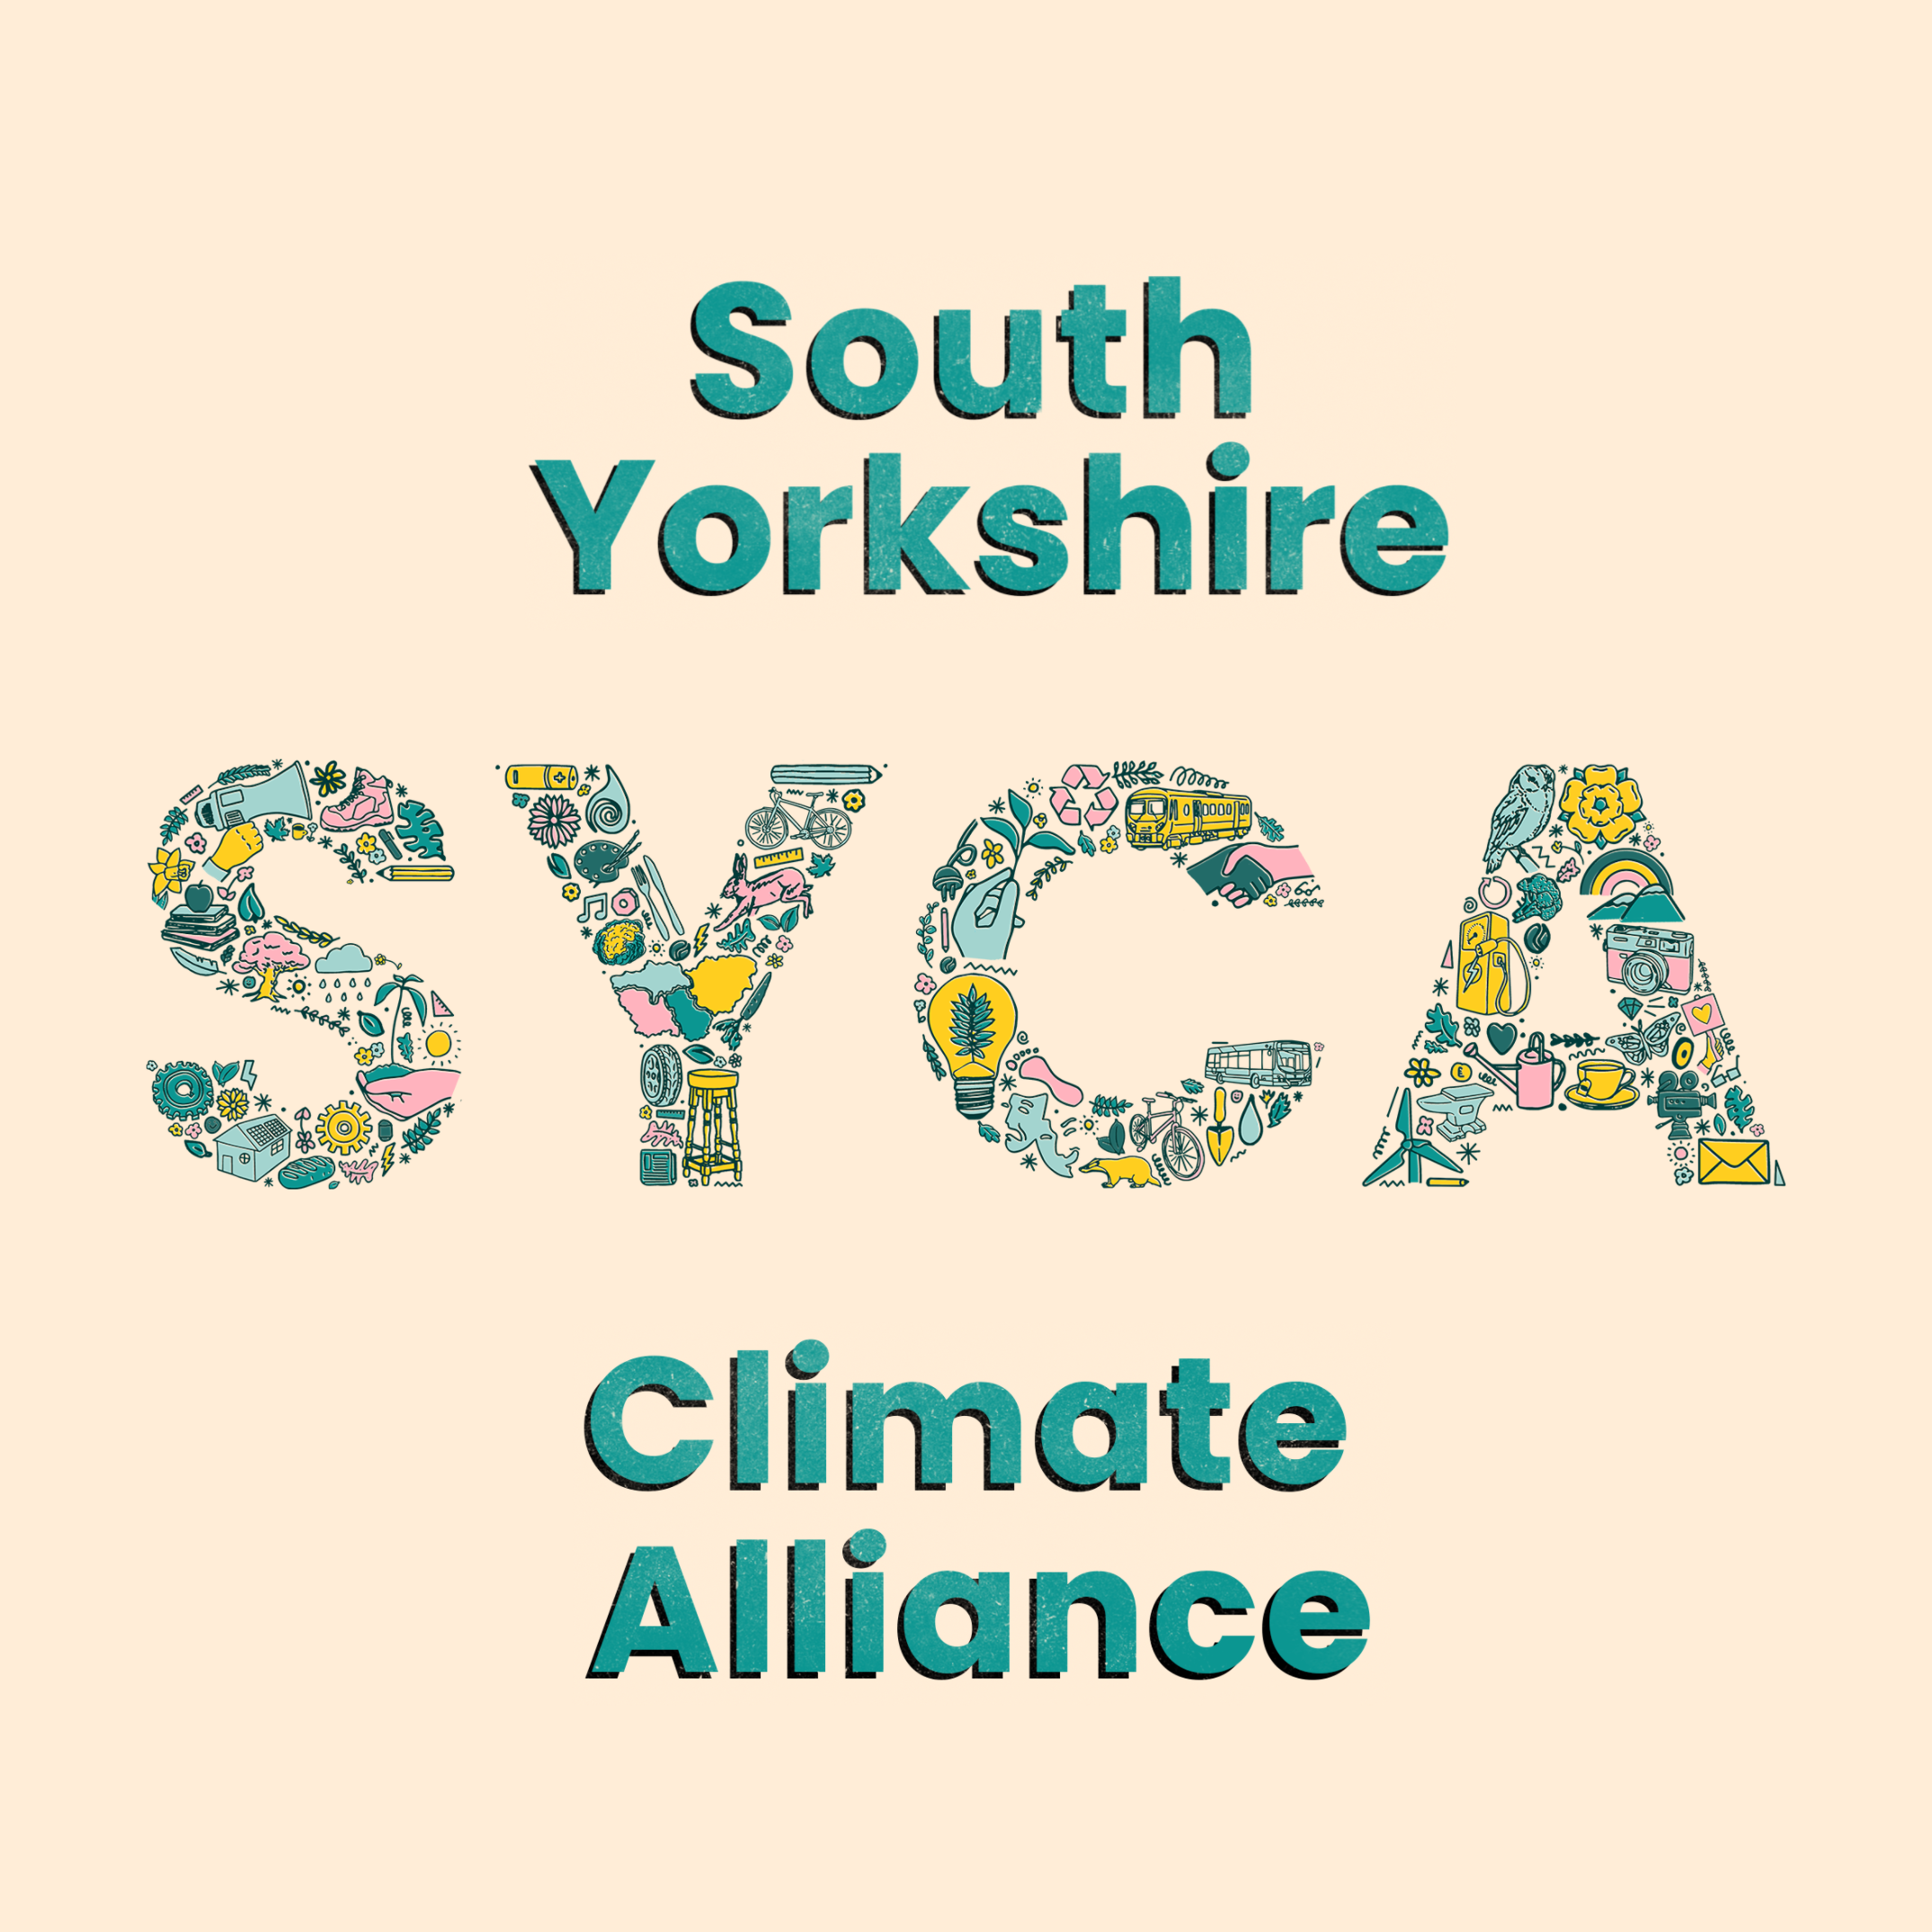 South Yorkshire Climate Alliance